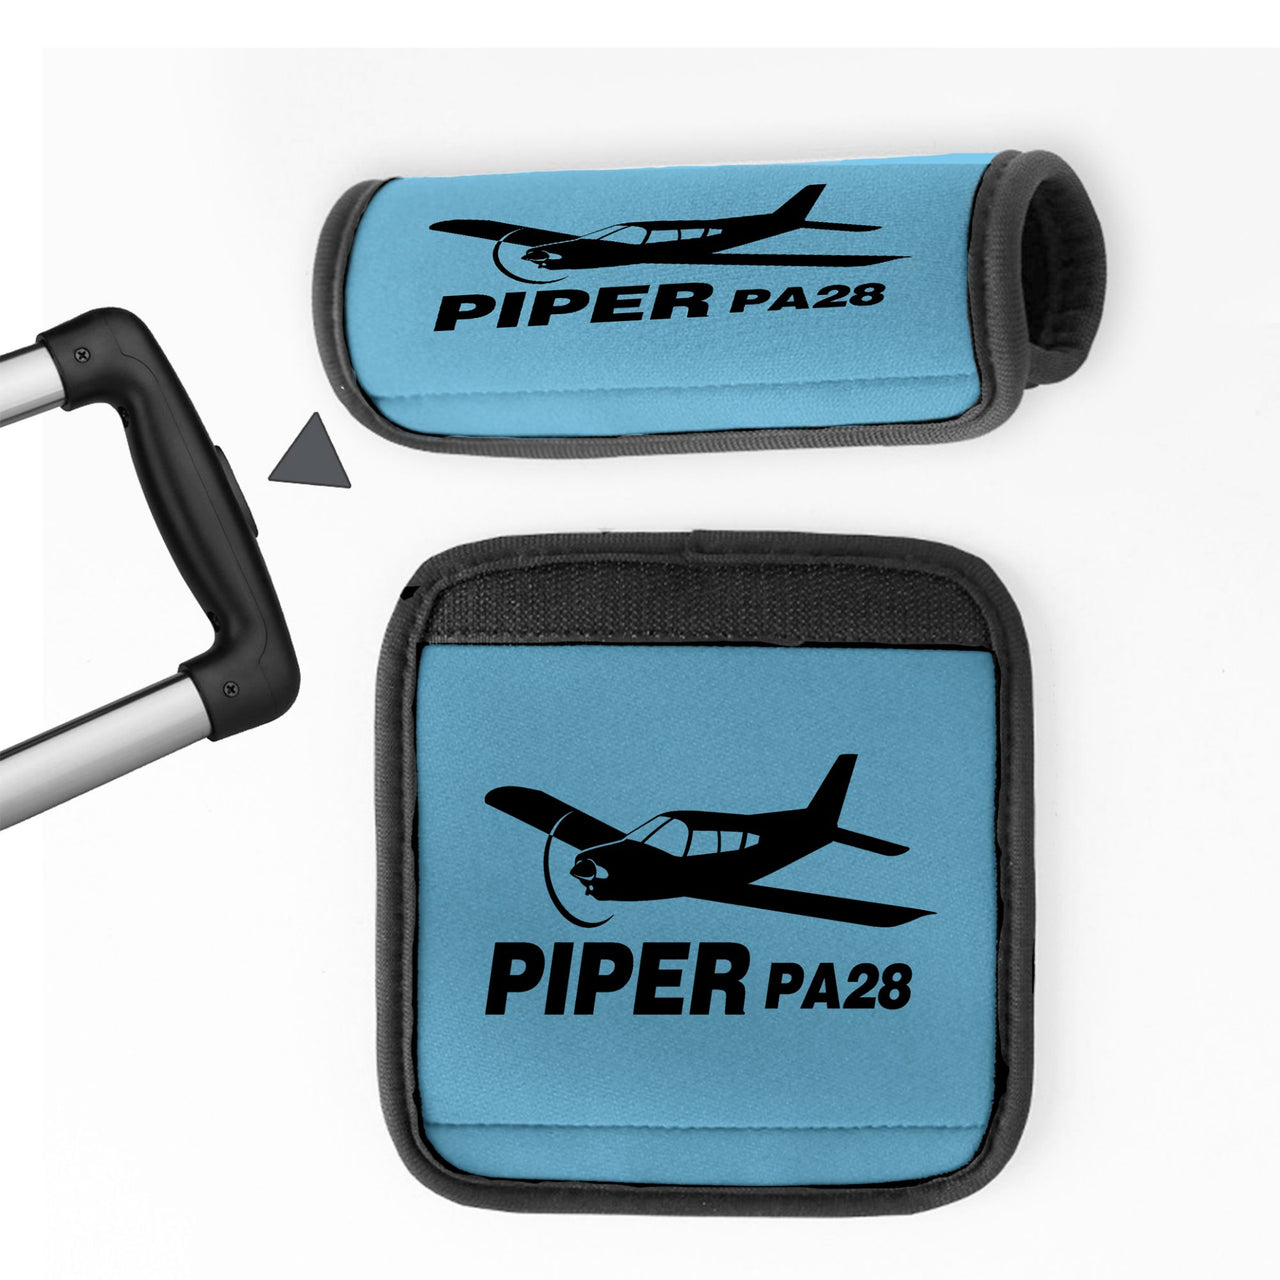 The Piper PA28 Designed Neoprene Luggage Handle Covers